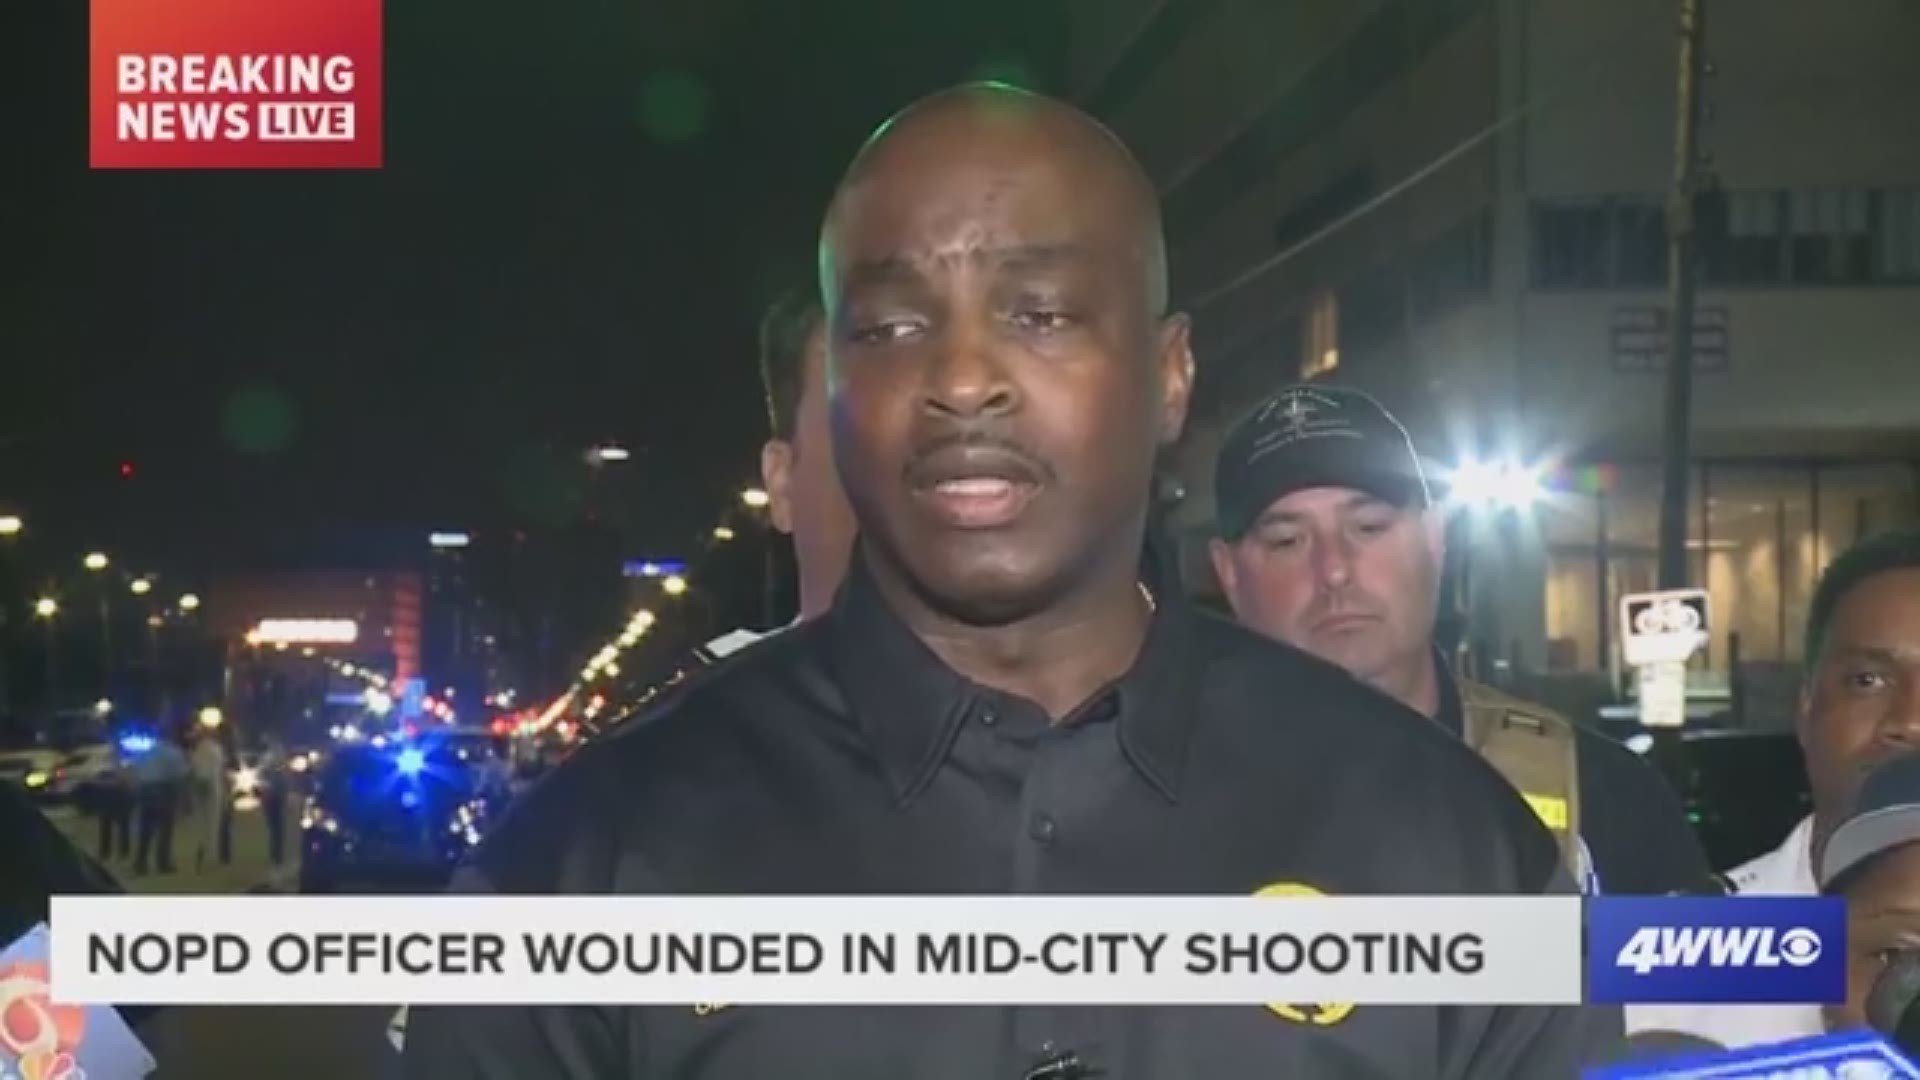 According to New Orleans Police Department officials, the officer was shot in the leg and taken to the hospital by ambulance.